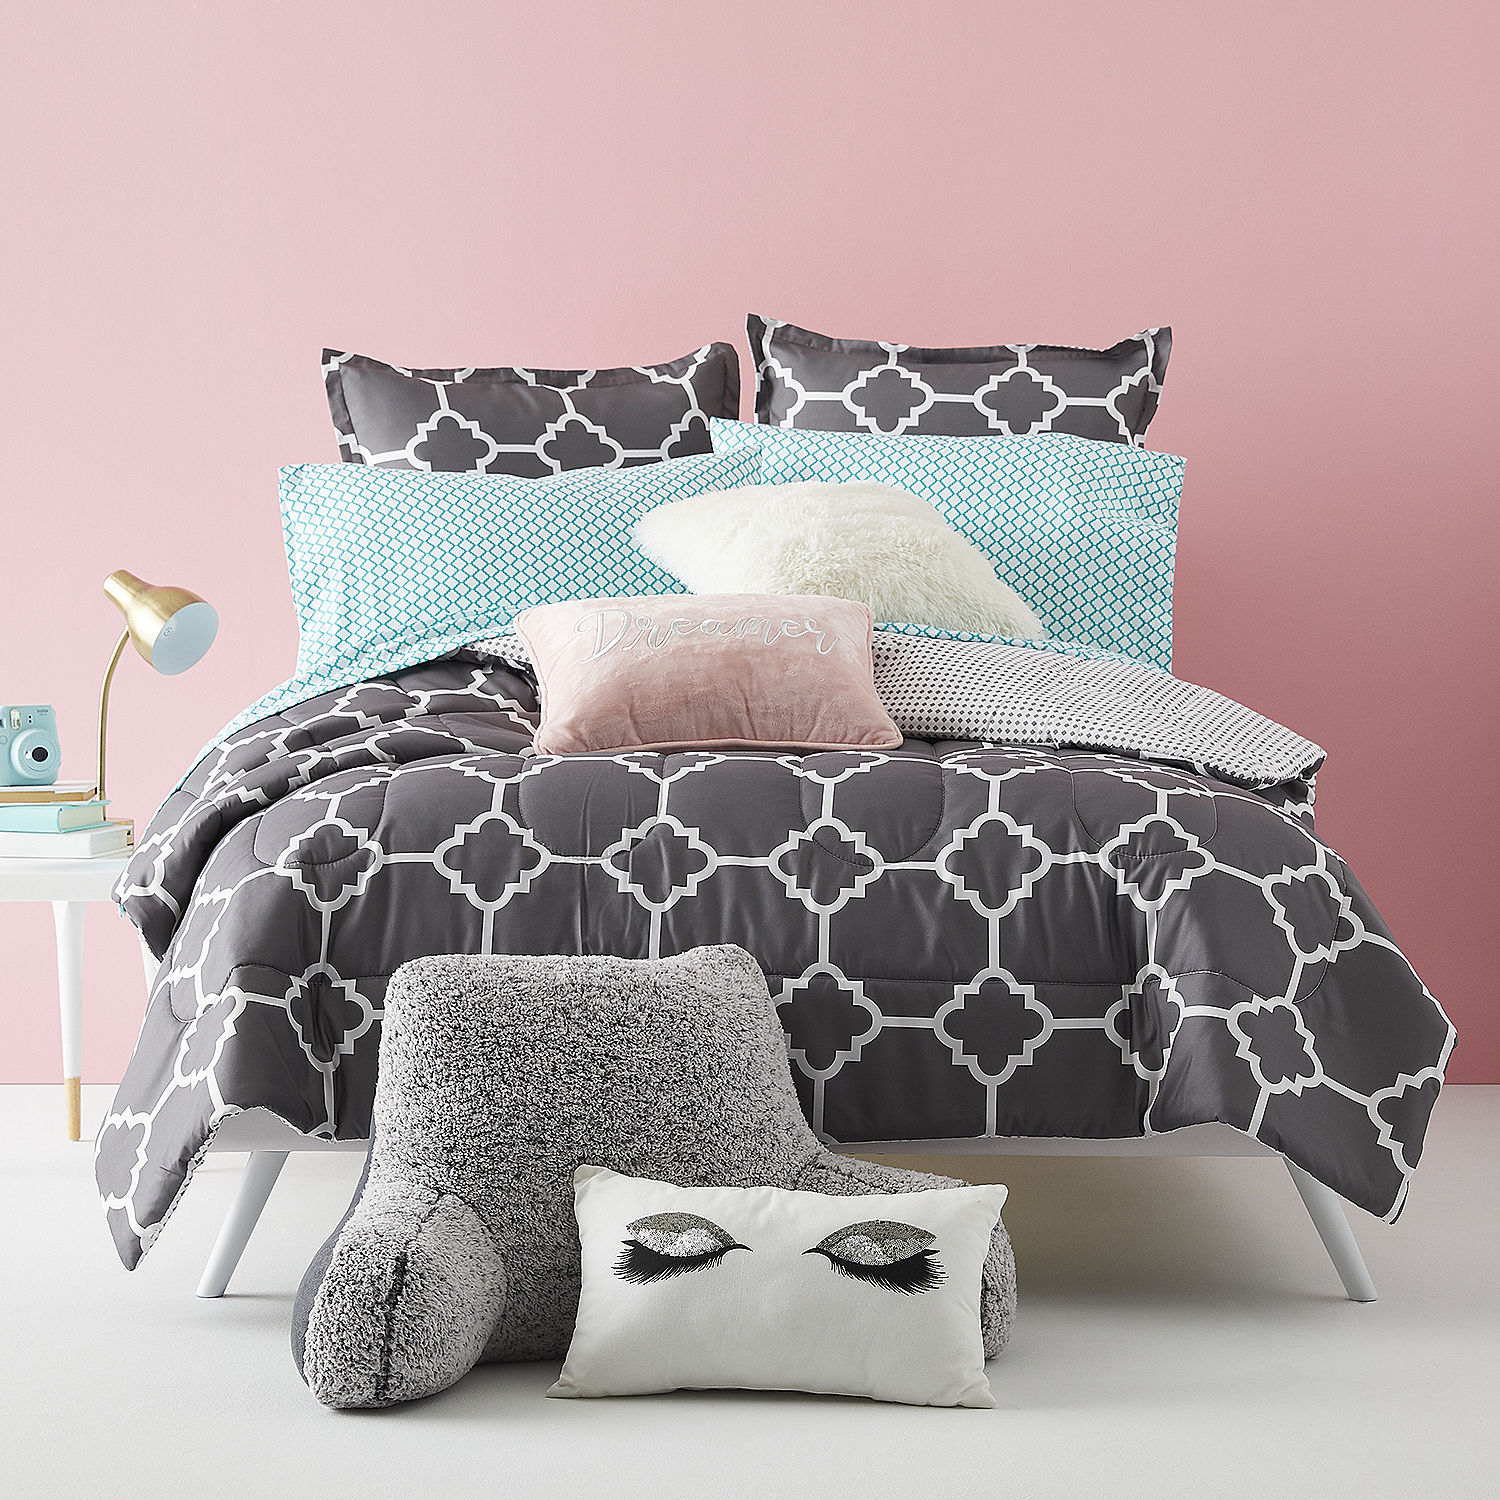 JC Penny - 39.99 ANY SIZE Complete Bedding Sets